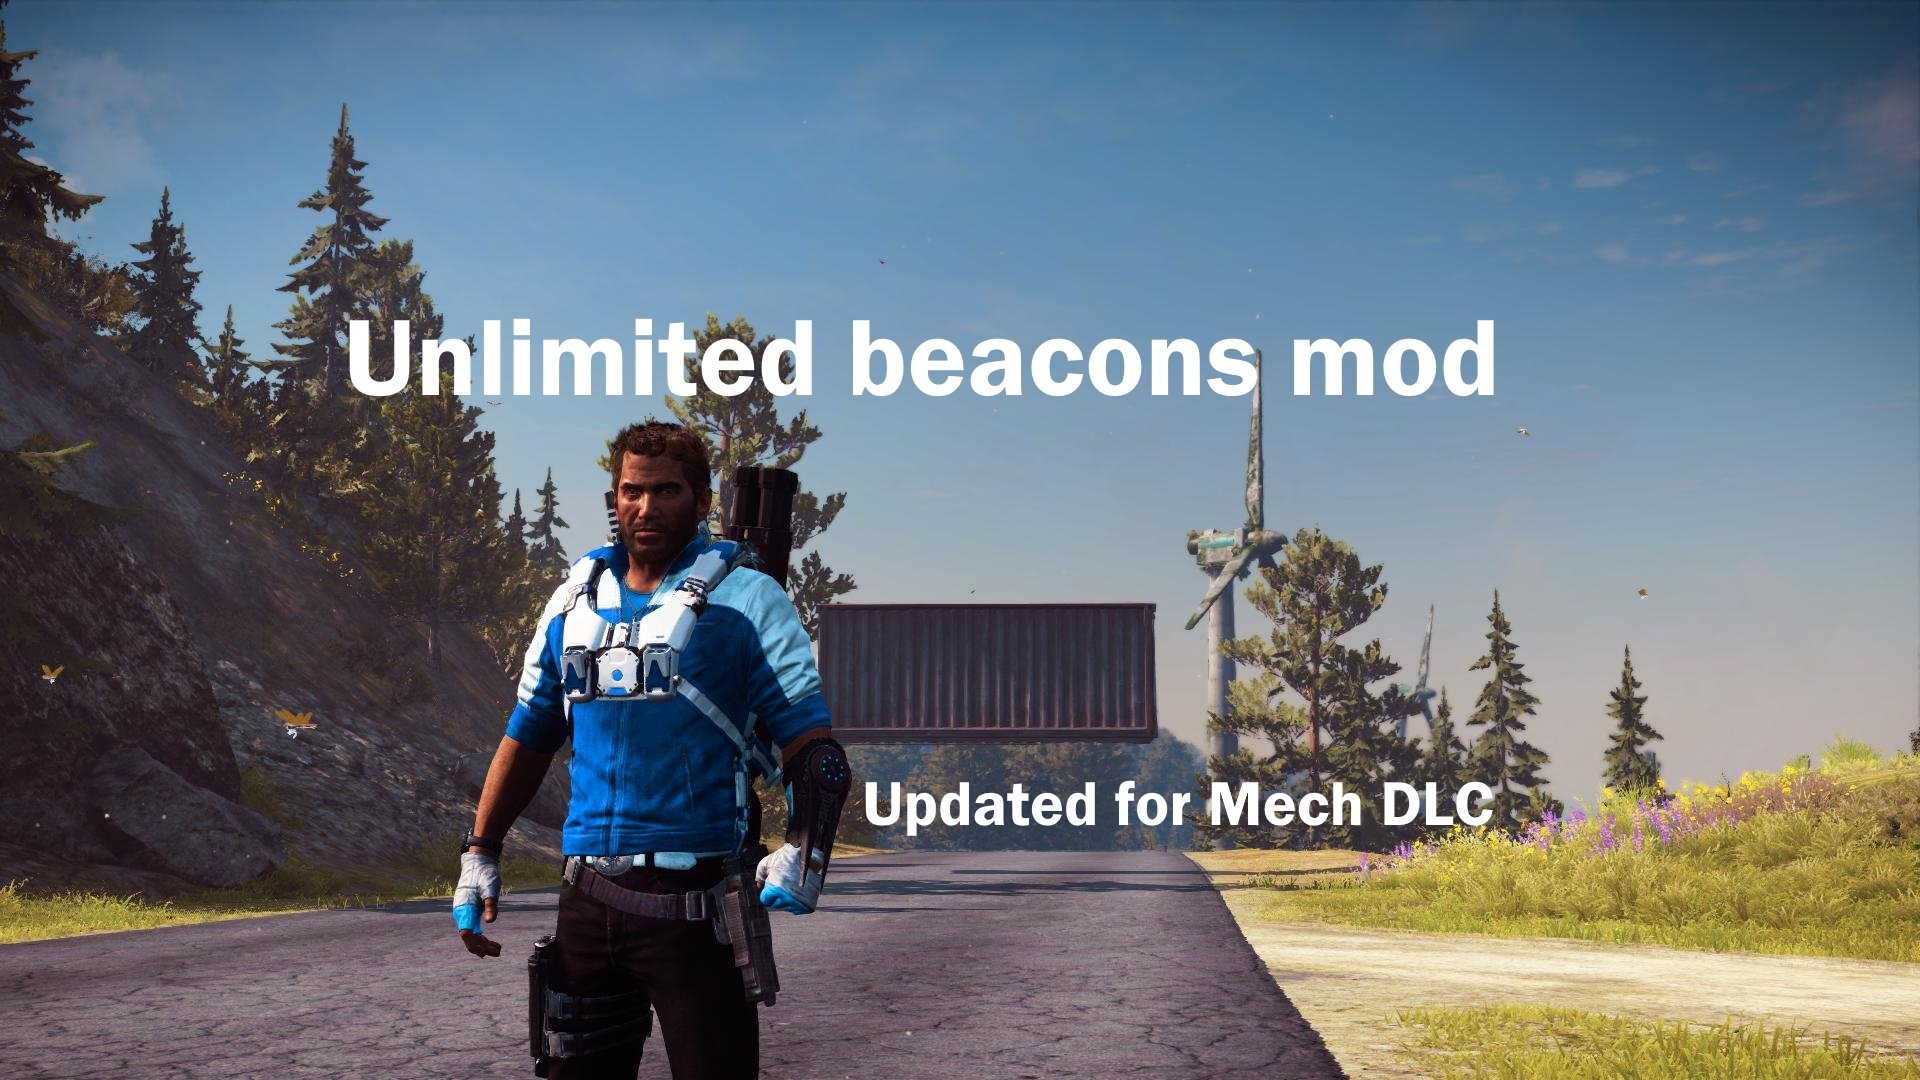 Unlimited beacons mod [Updated for Sea Heist DLC]